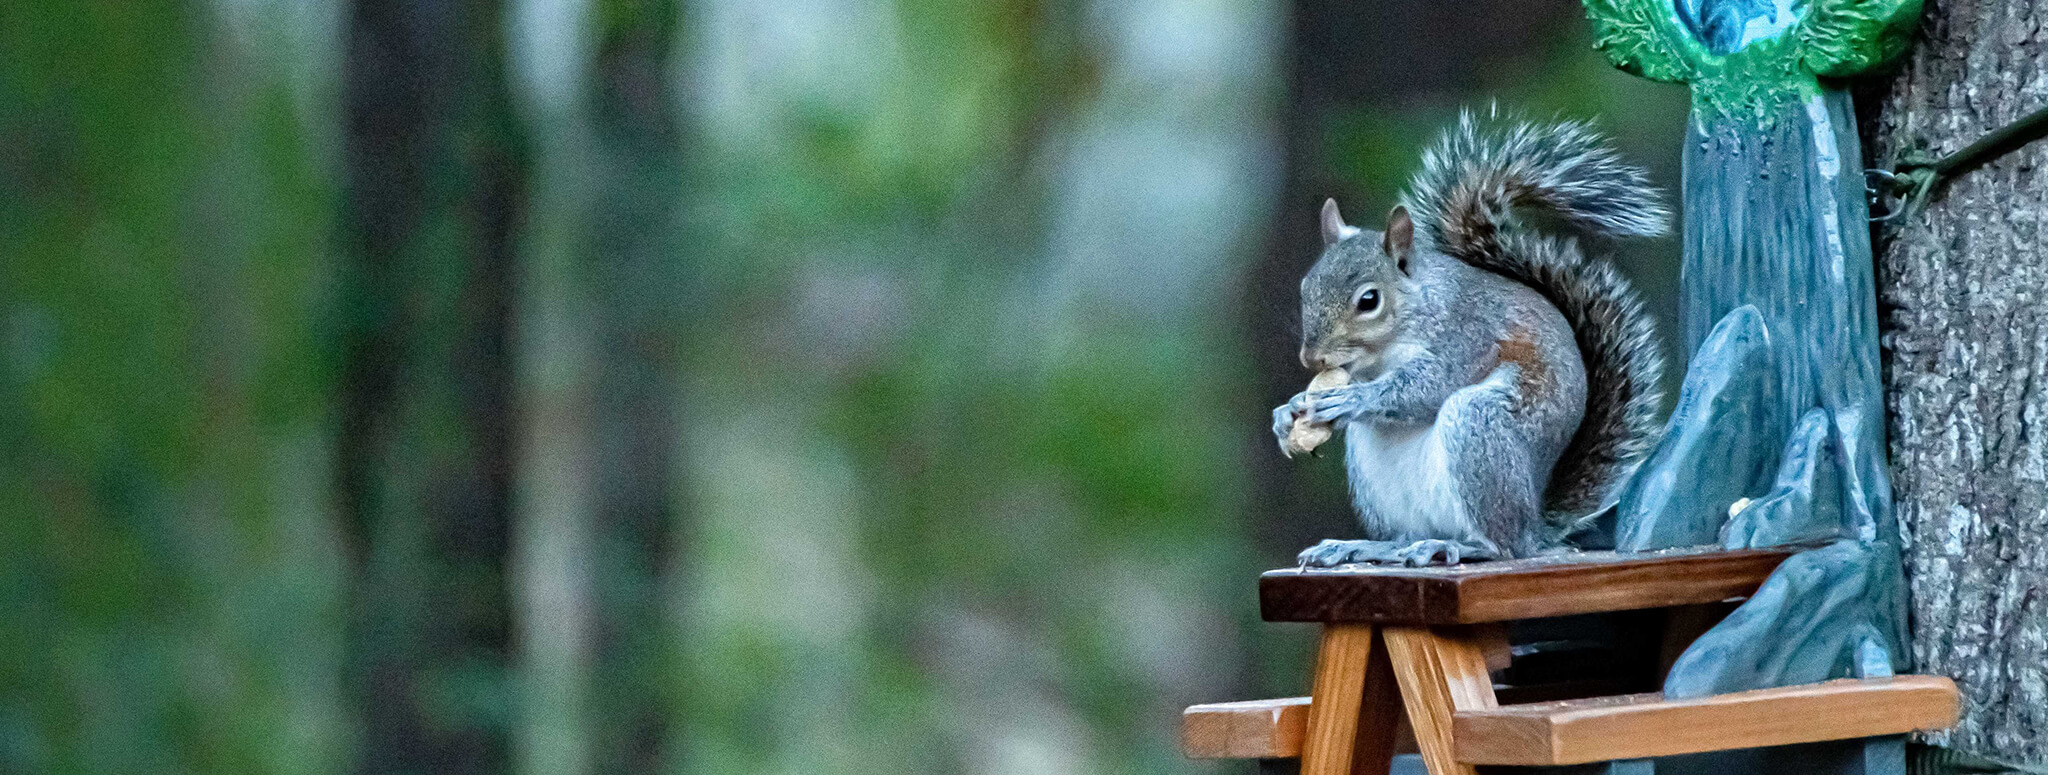 squirrel eating a peanut sitting on a small picnic table